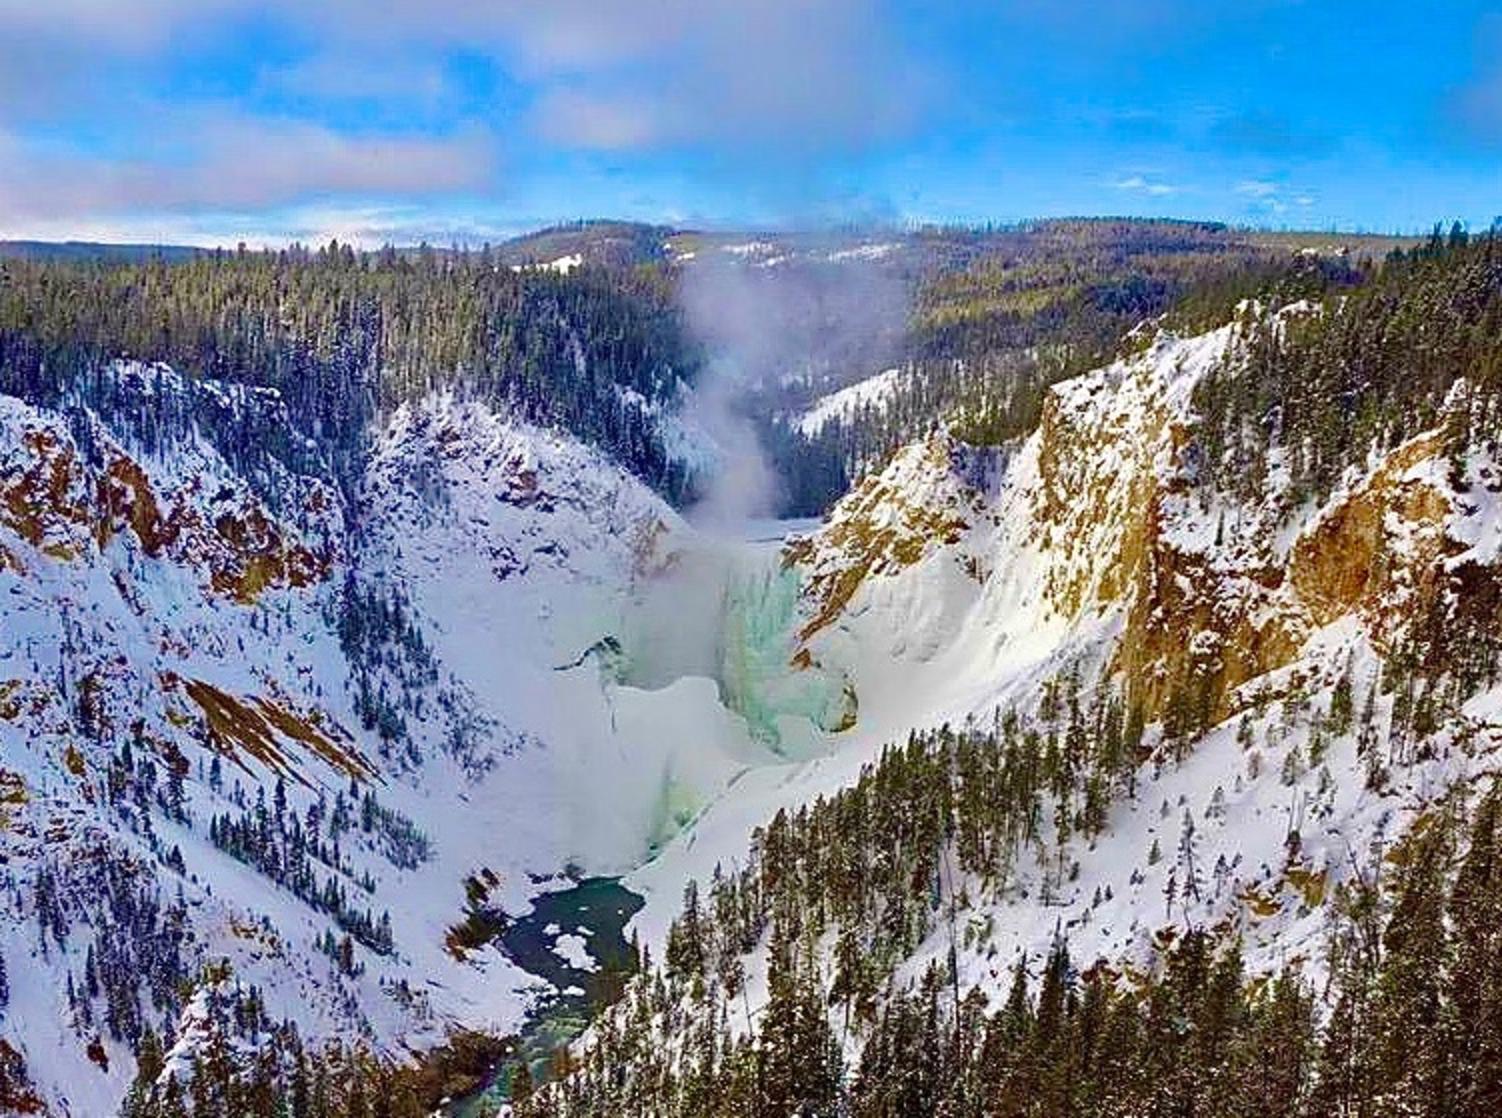 A view painted by Thomas Moran more than 150 years ago, the Grand Canyon of the Yellowstone is captured here in winter by Steve Fuller. The Canyon rim is only a short walk from his winterkeeper's residence. Note how the mighty Lower Falls, three times taller than Niagara, is sheathed in ice.  Photo courtesy Steven Fuller